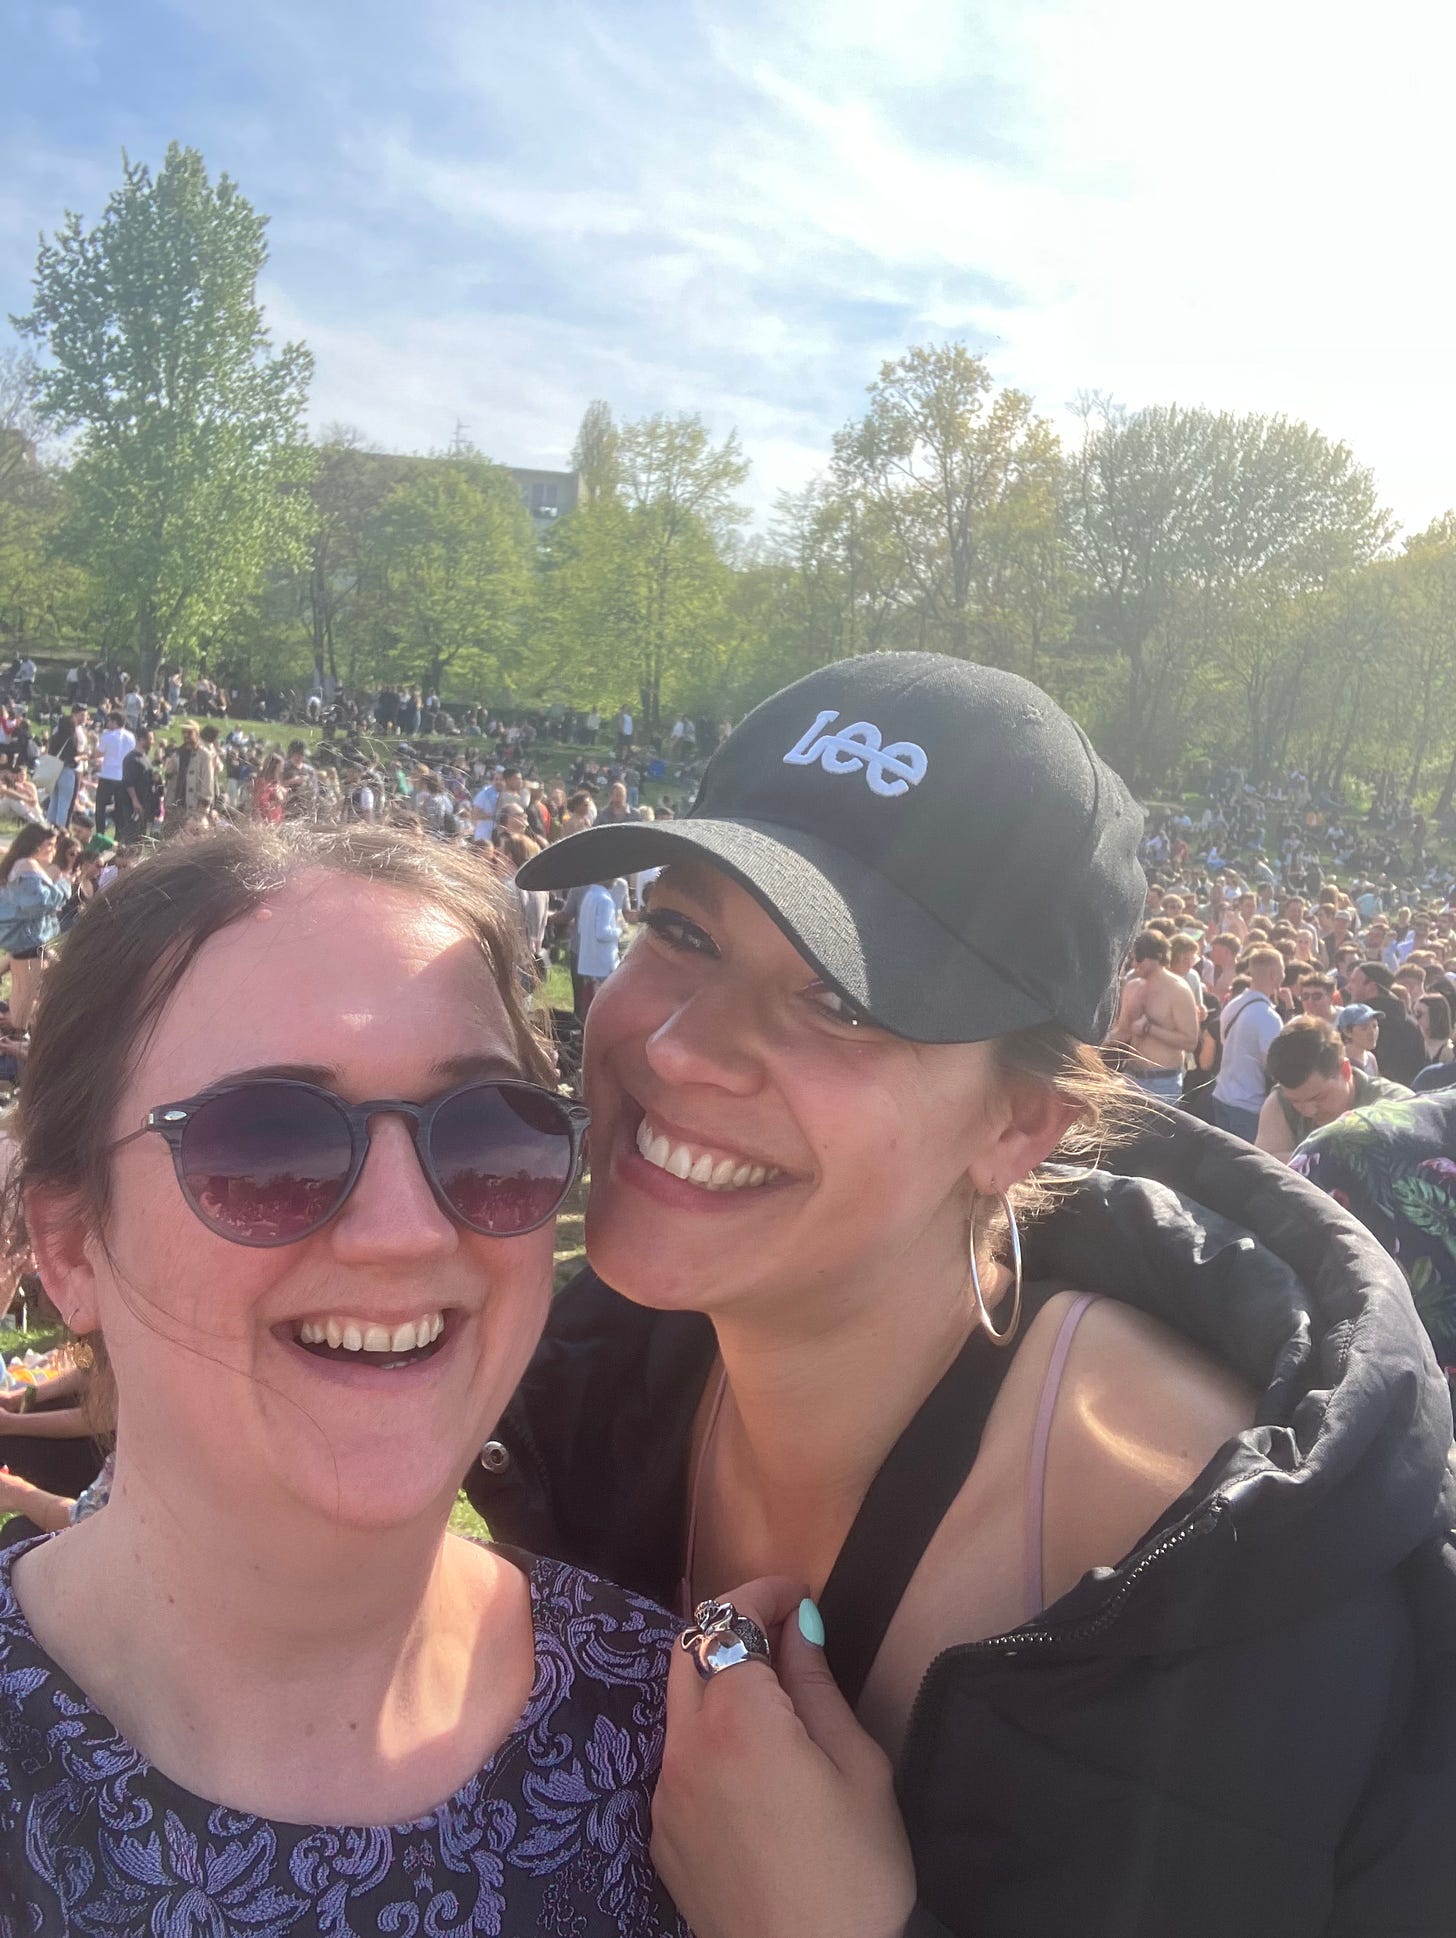 Me and my friend smiling in front of crowds in a park in Berlin on May Day